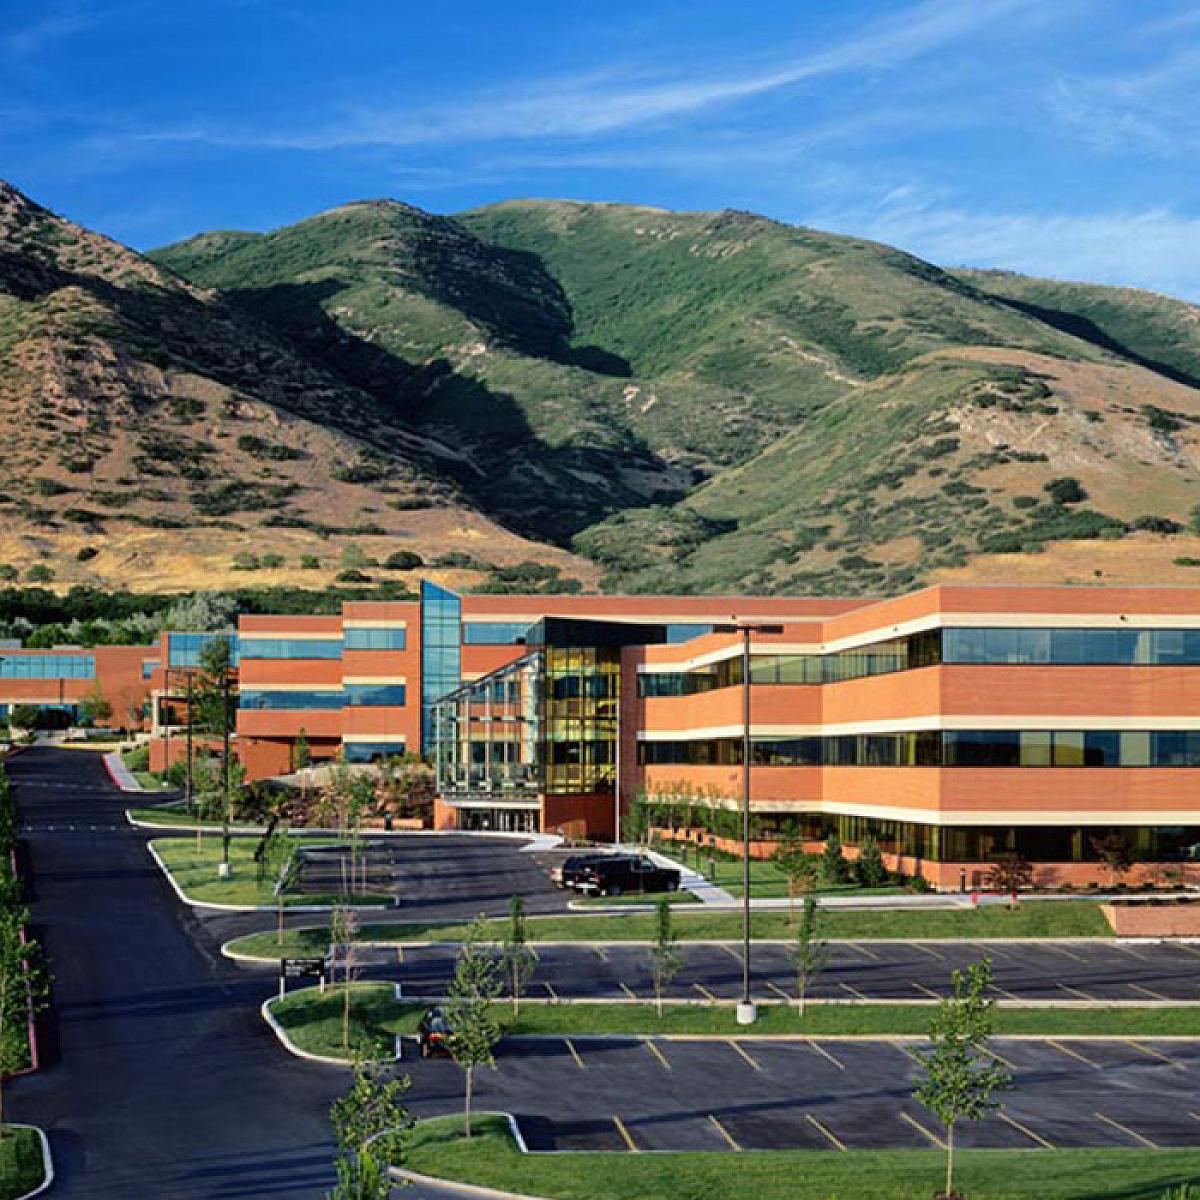 Aerial View of Campus with Buildings, Parking Lot, and Mountain